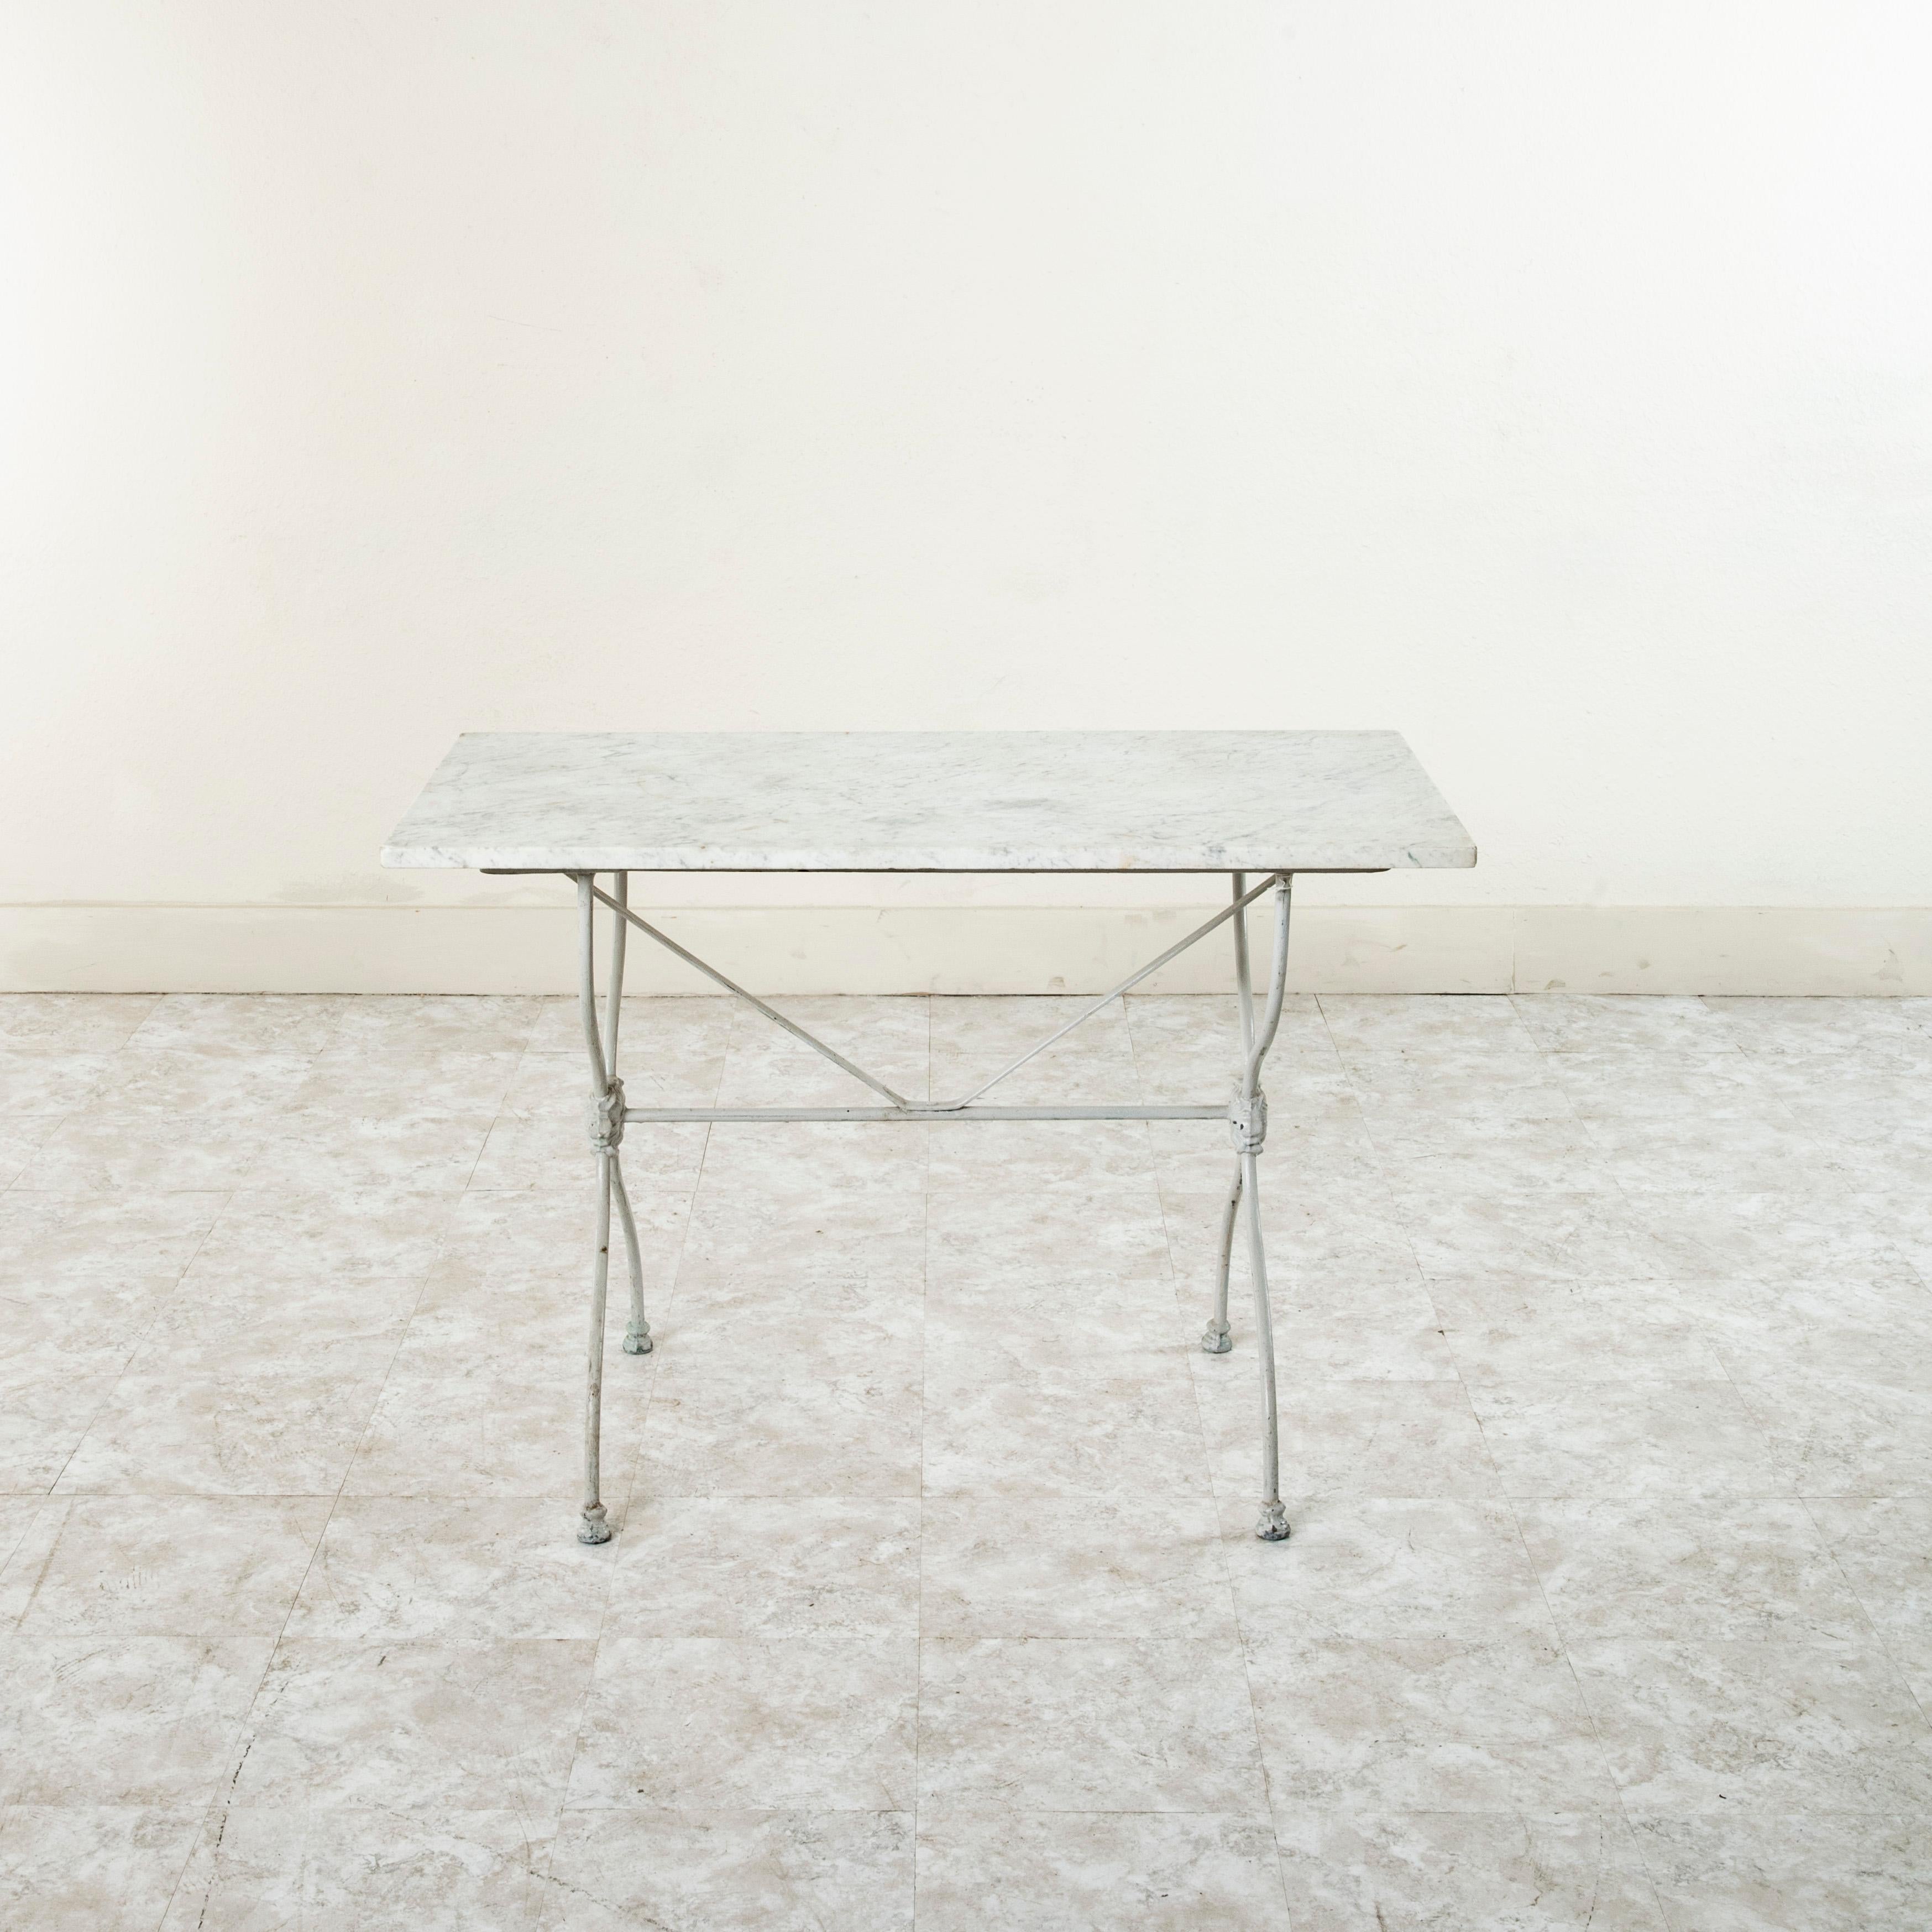 Originally used in a French butcher's shop during the late nineteenth century, this cast iron table features a solid white marble top. Its pale grey painted curved iron legs support the top and are joined by a central stretcher. The stretcher is